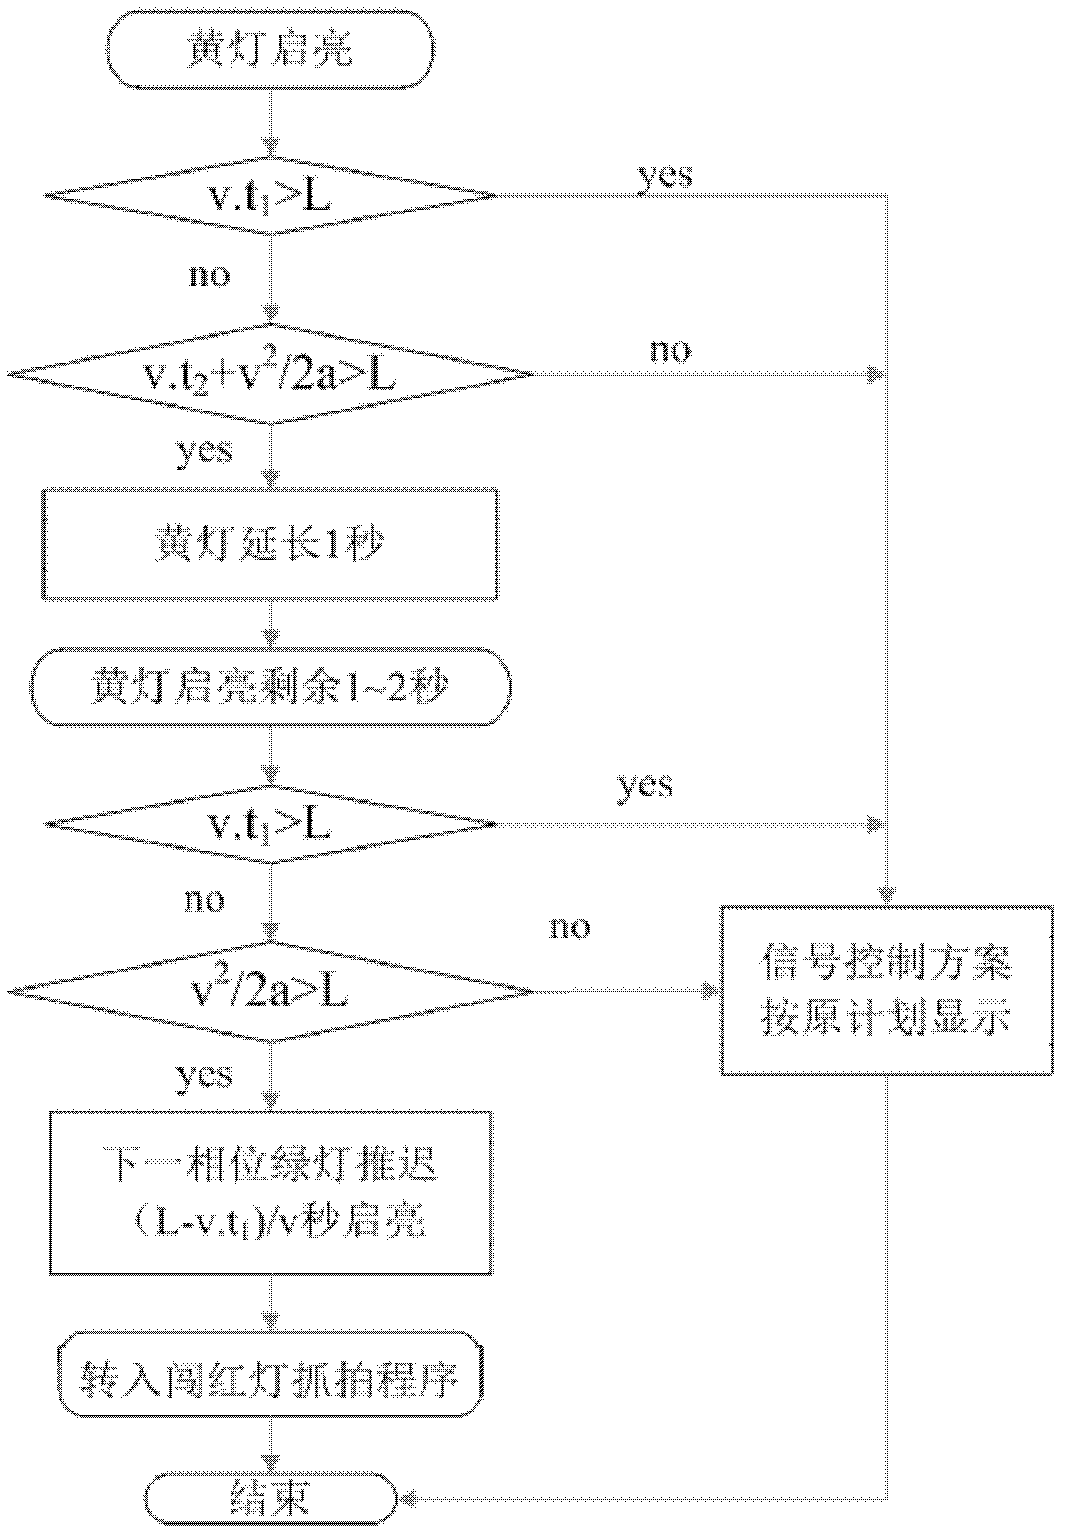 Method for determining red-light running of vehicles at intersection based on video detection and signal control system